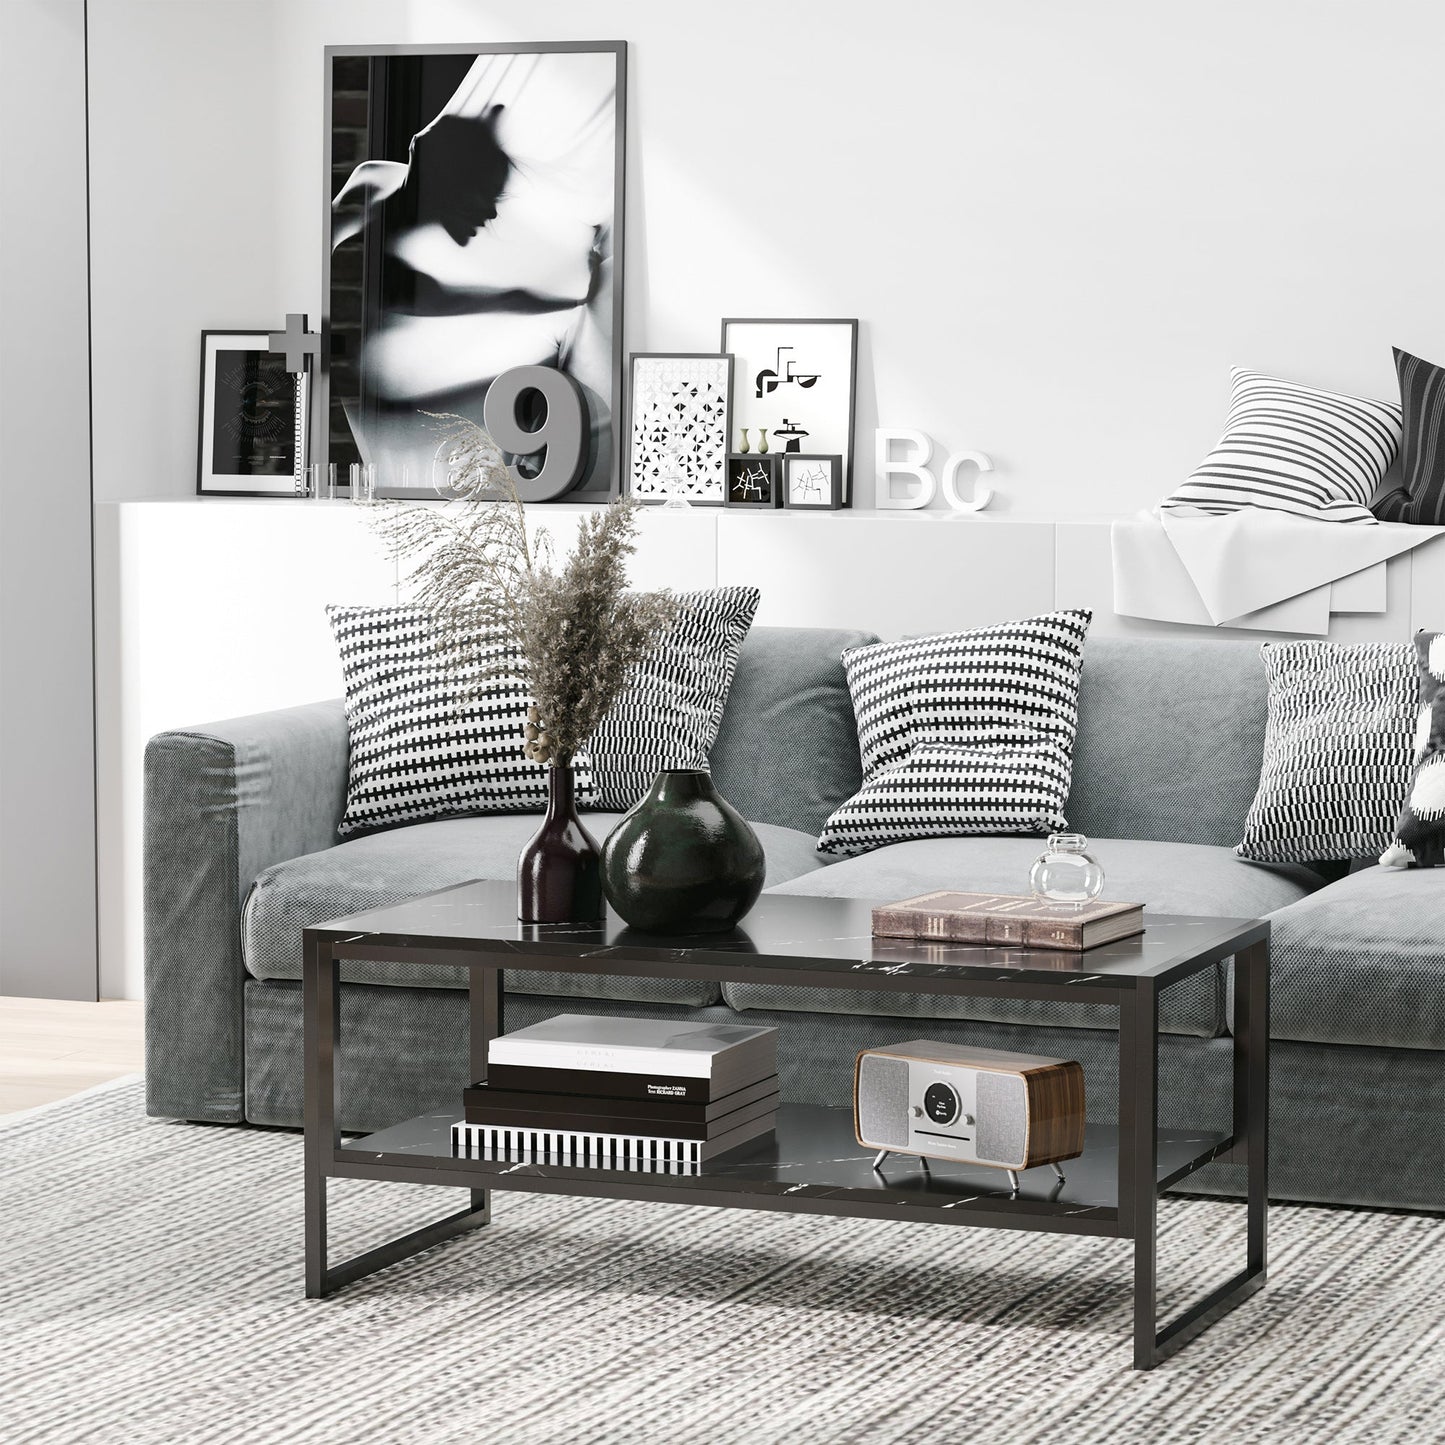 2-Tier Coffee Table with Storage Shelf, Cocktail Table with Marble Textured Table Top, for Living Room Bedroom Dorm, Black - Gallery Canada